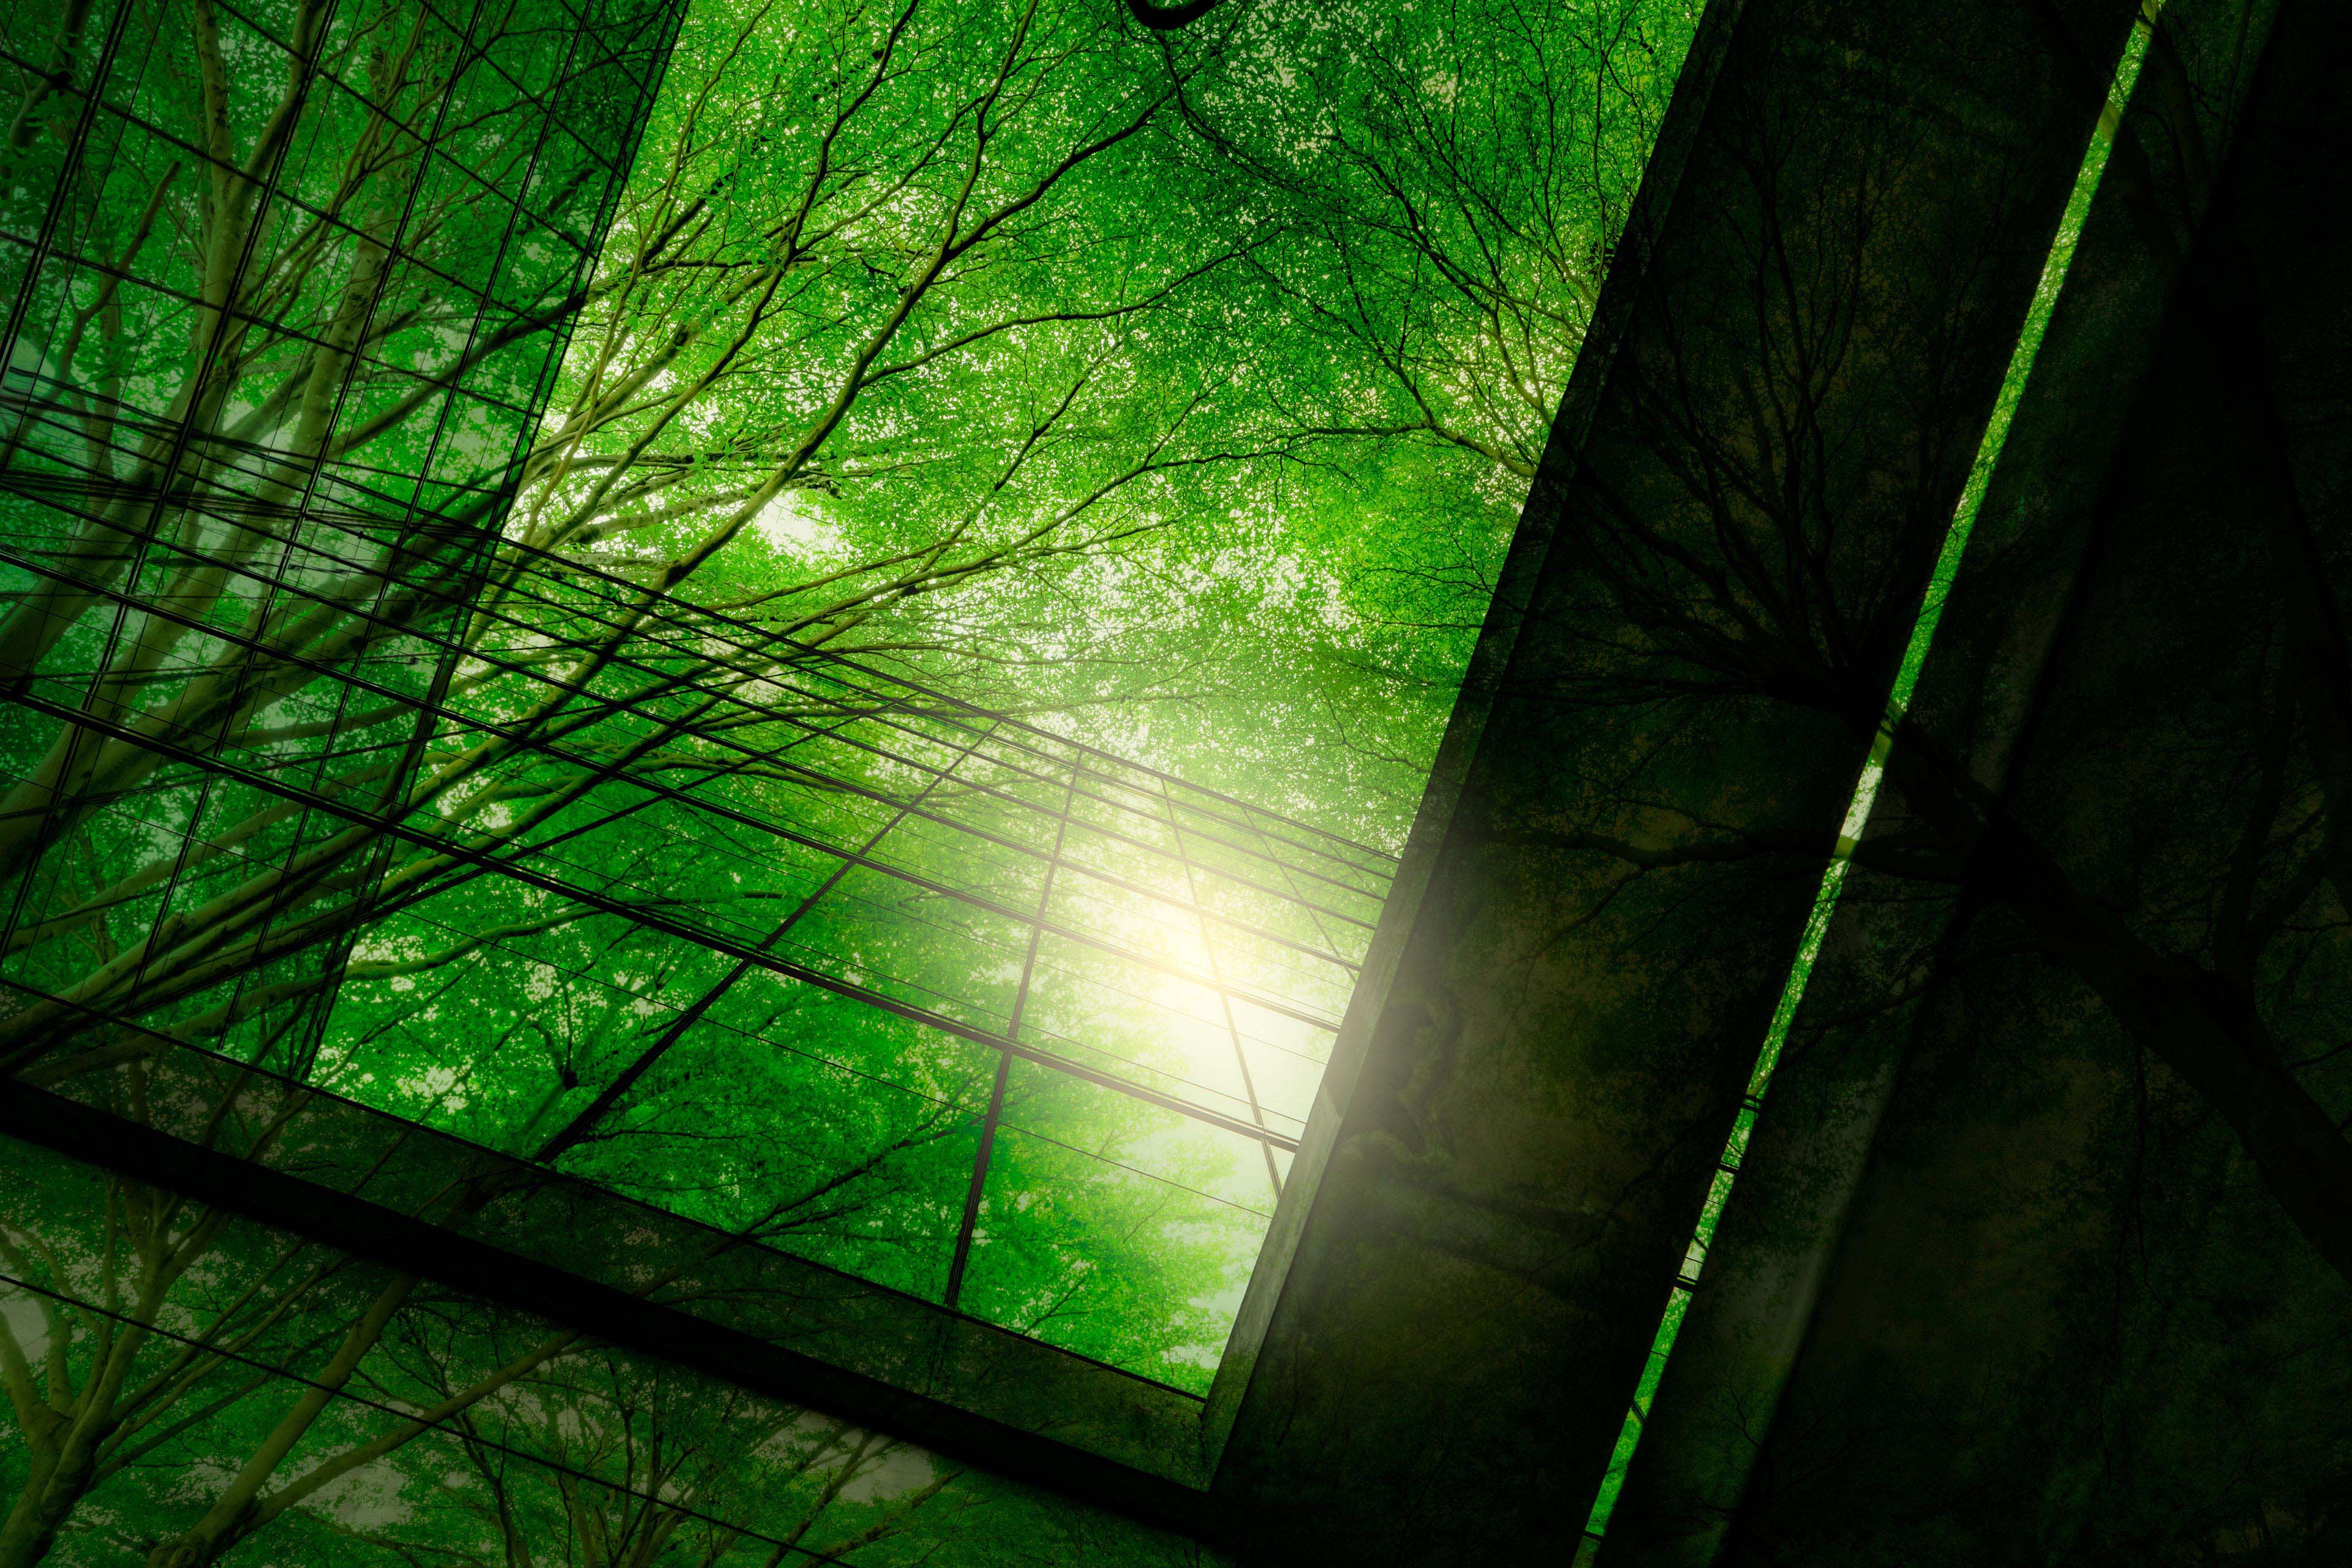 Abstract view of office building against greenery